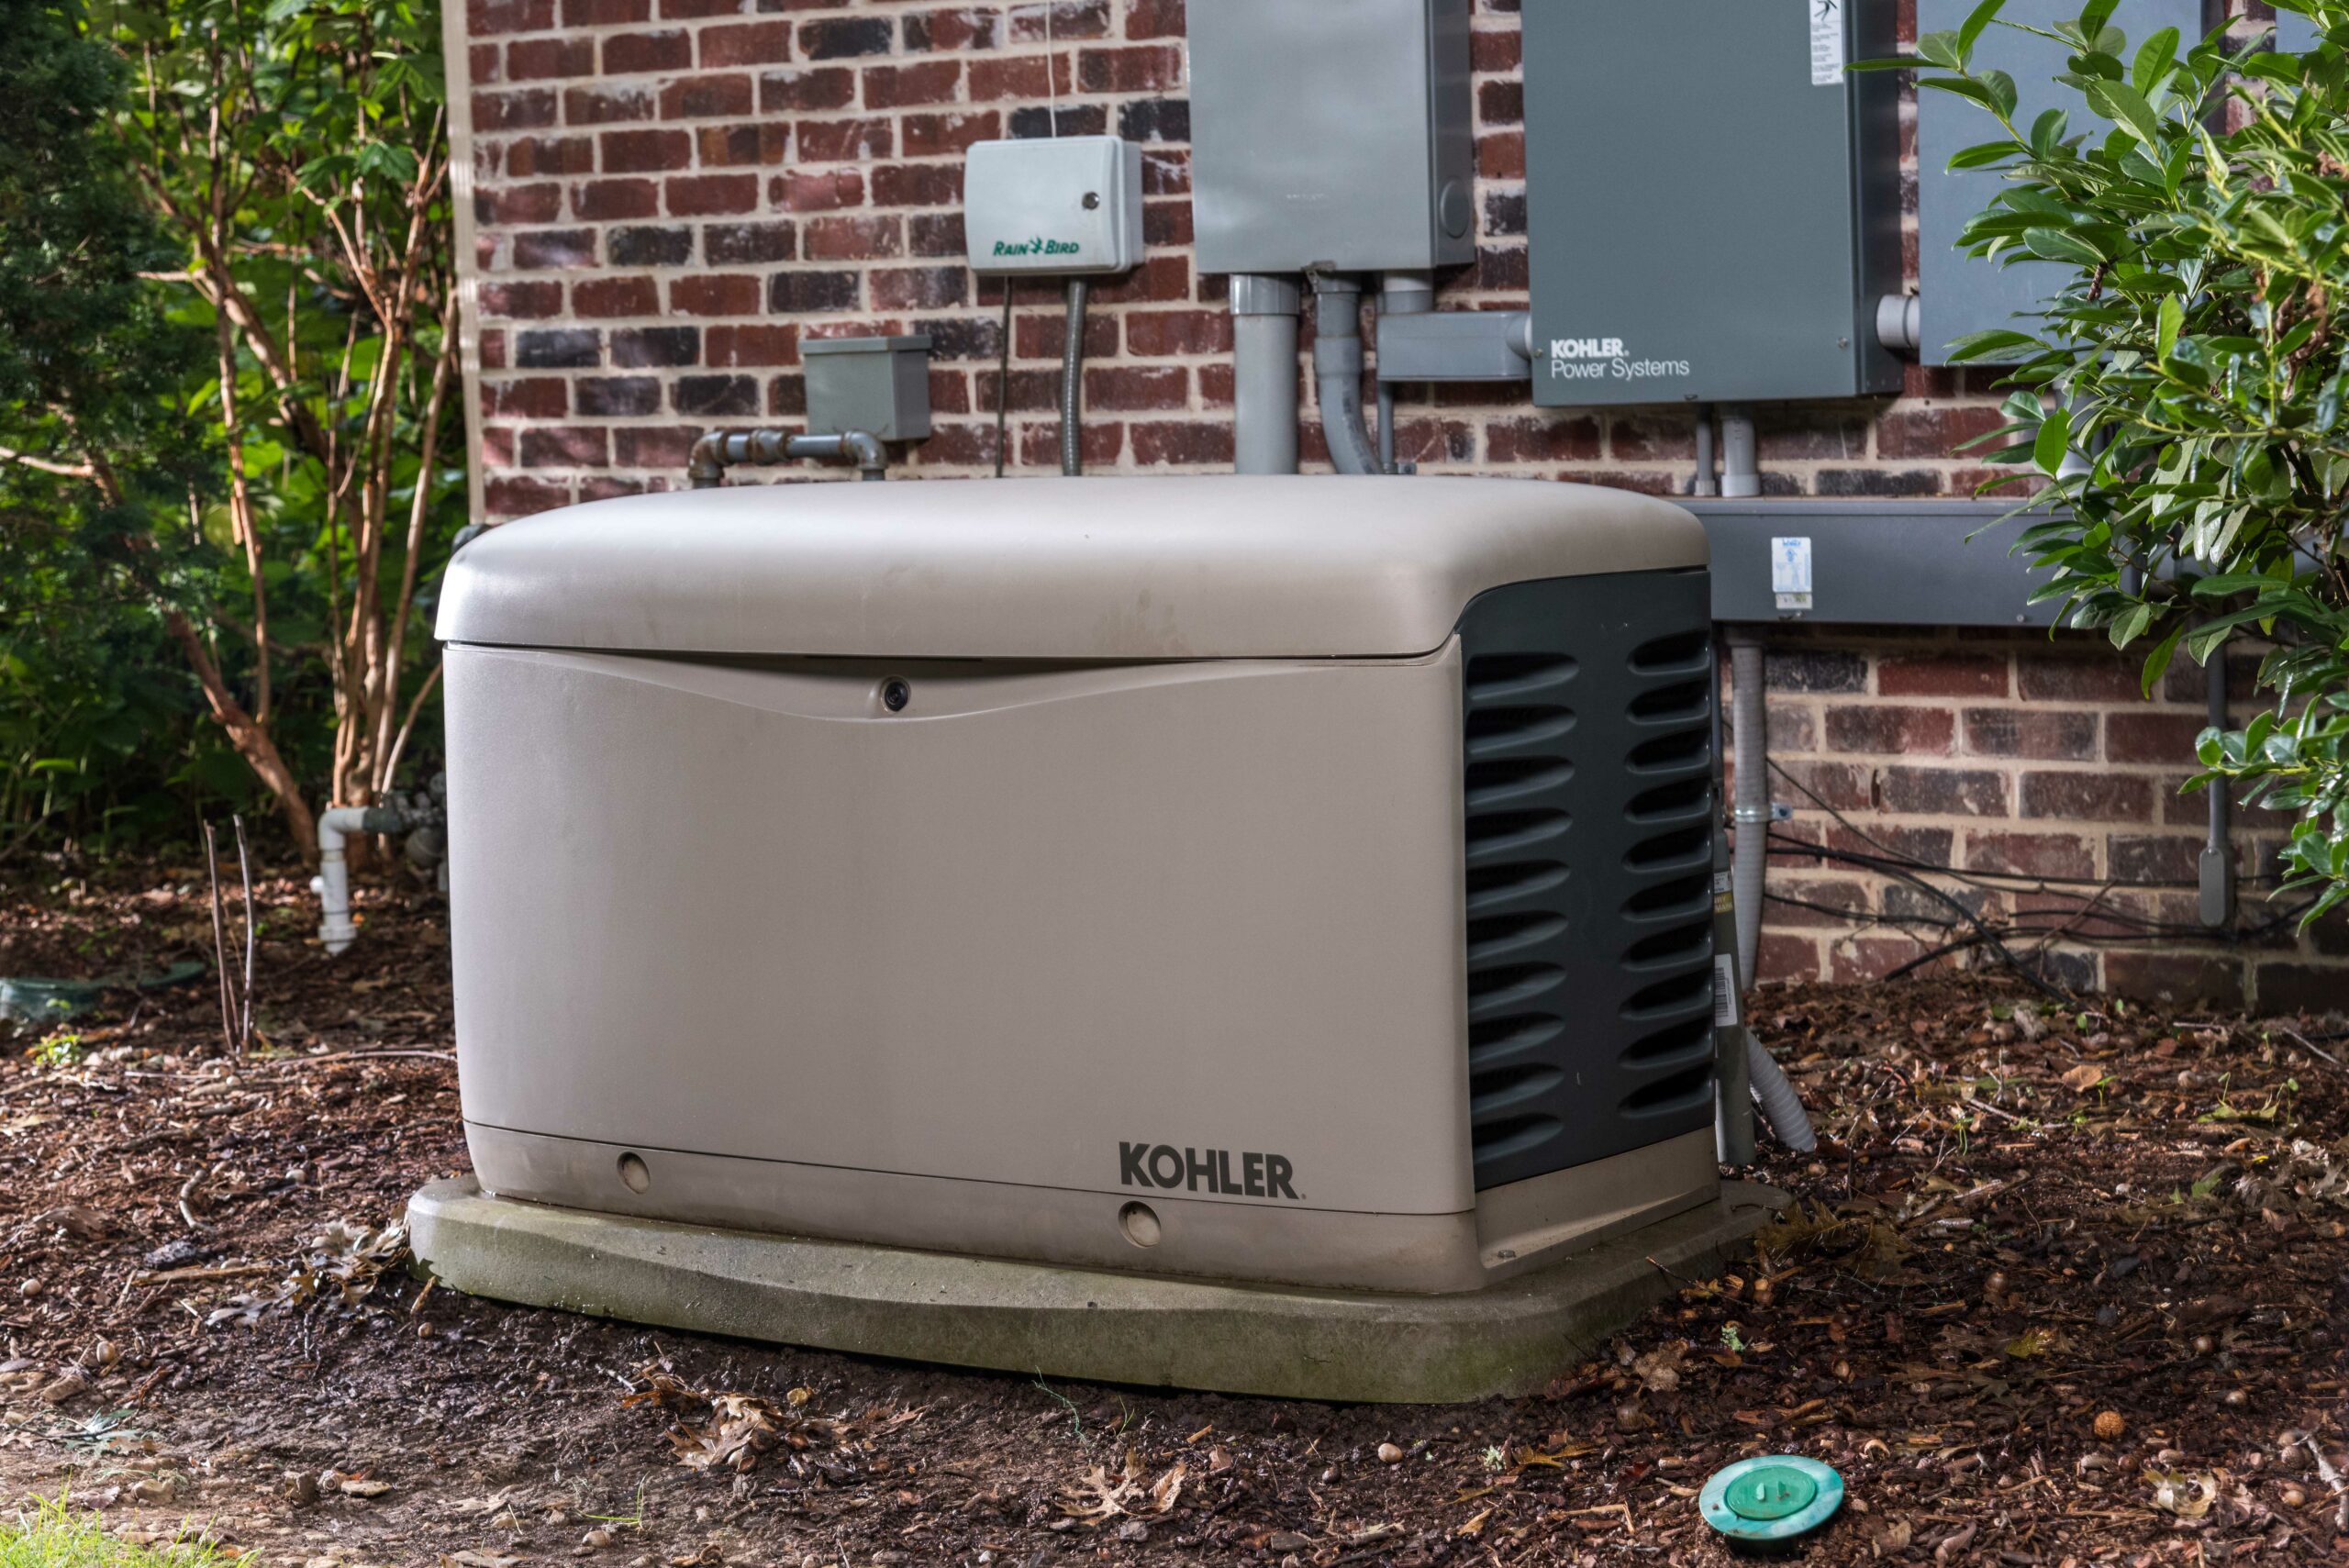 Considerations For Storing Generators Outside